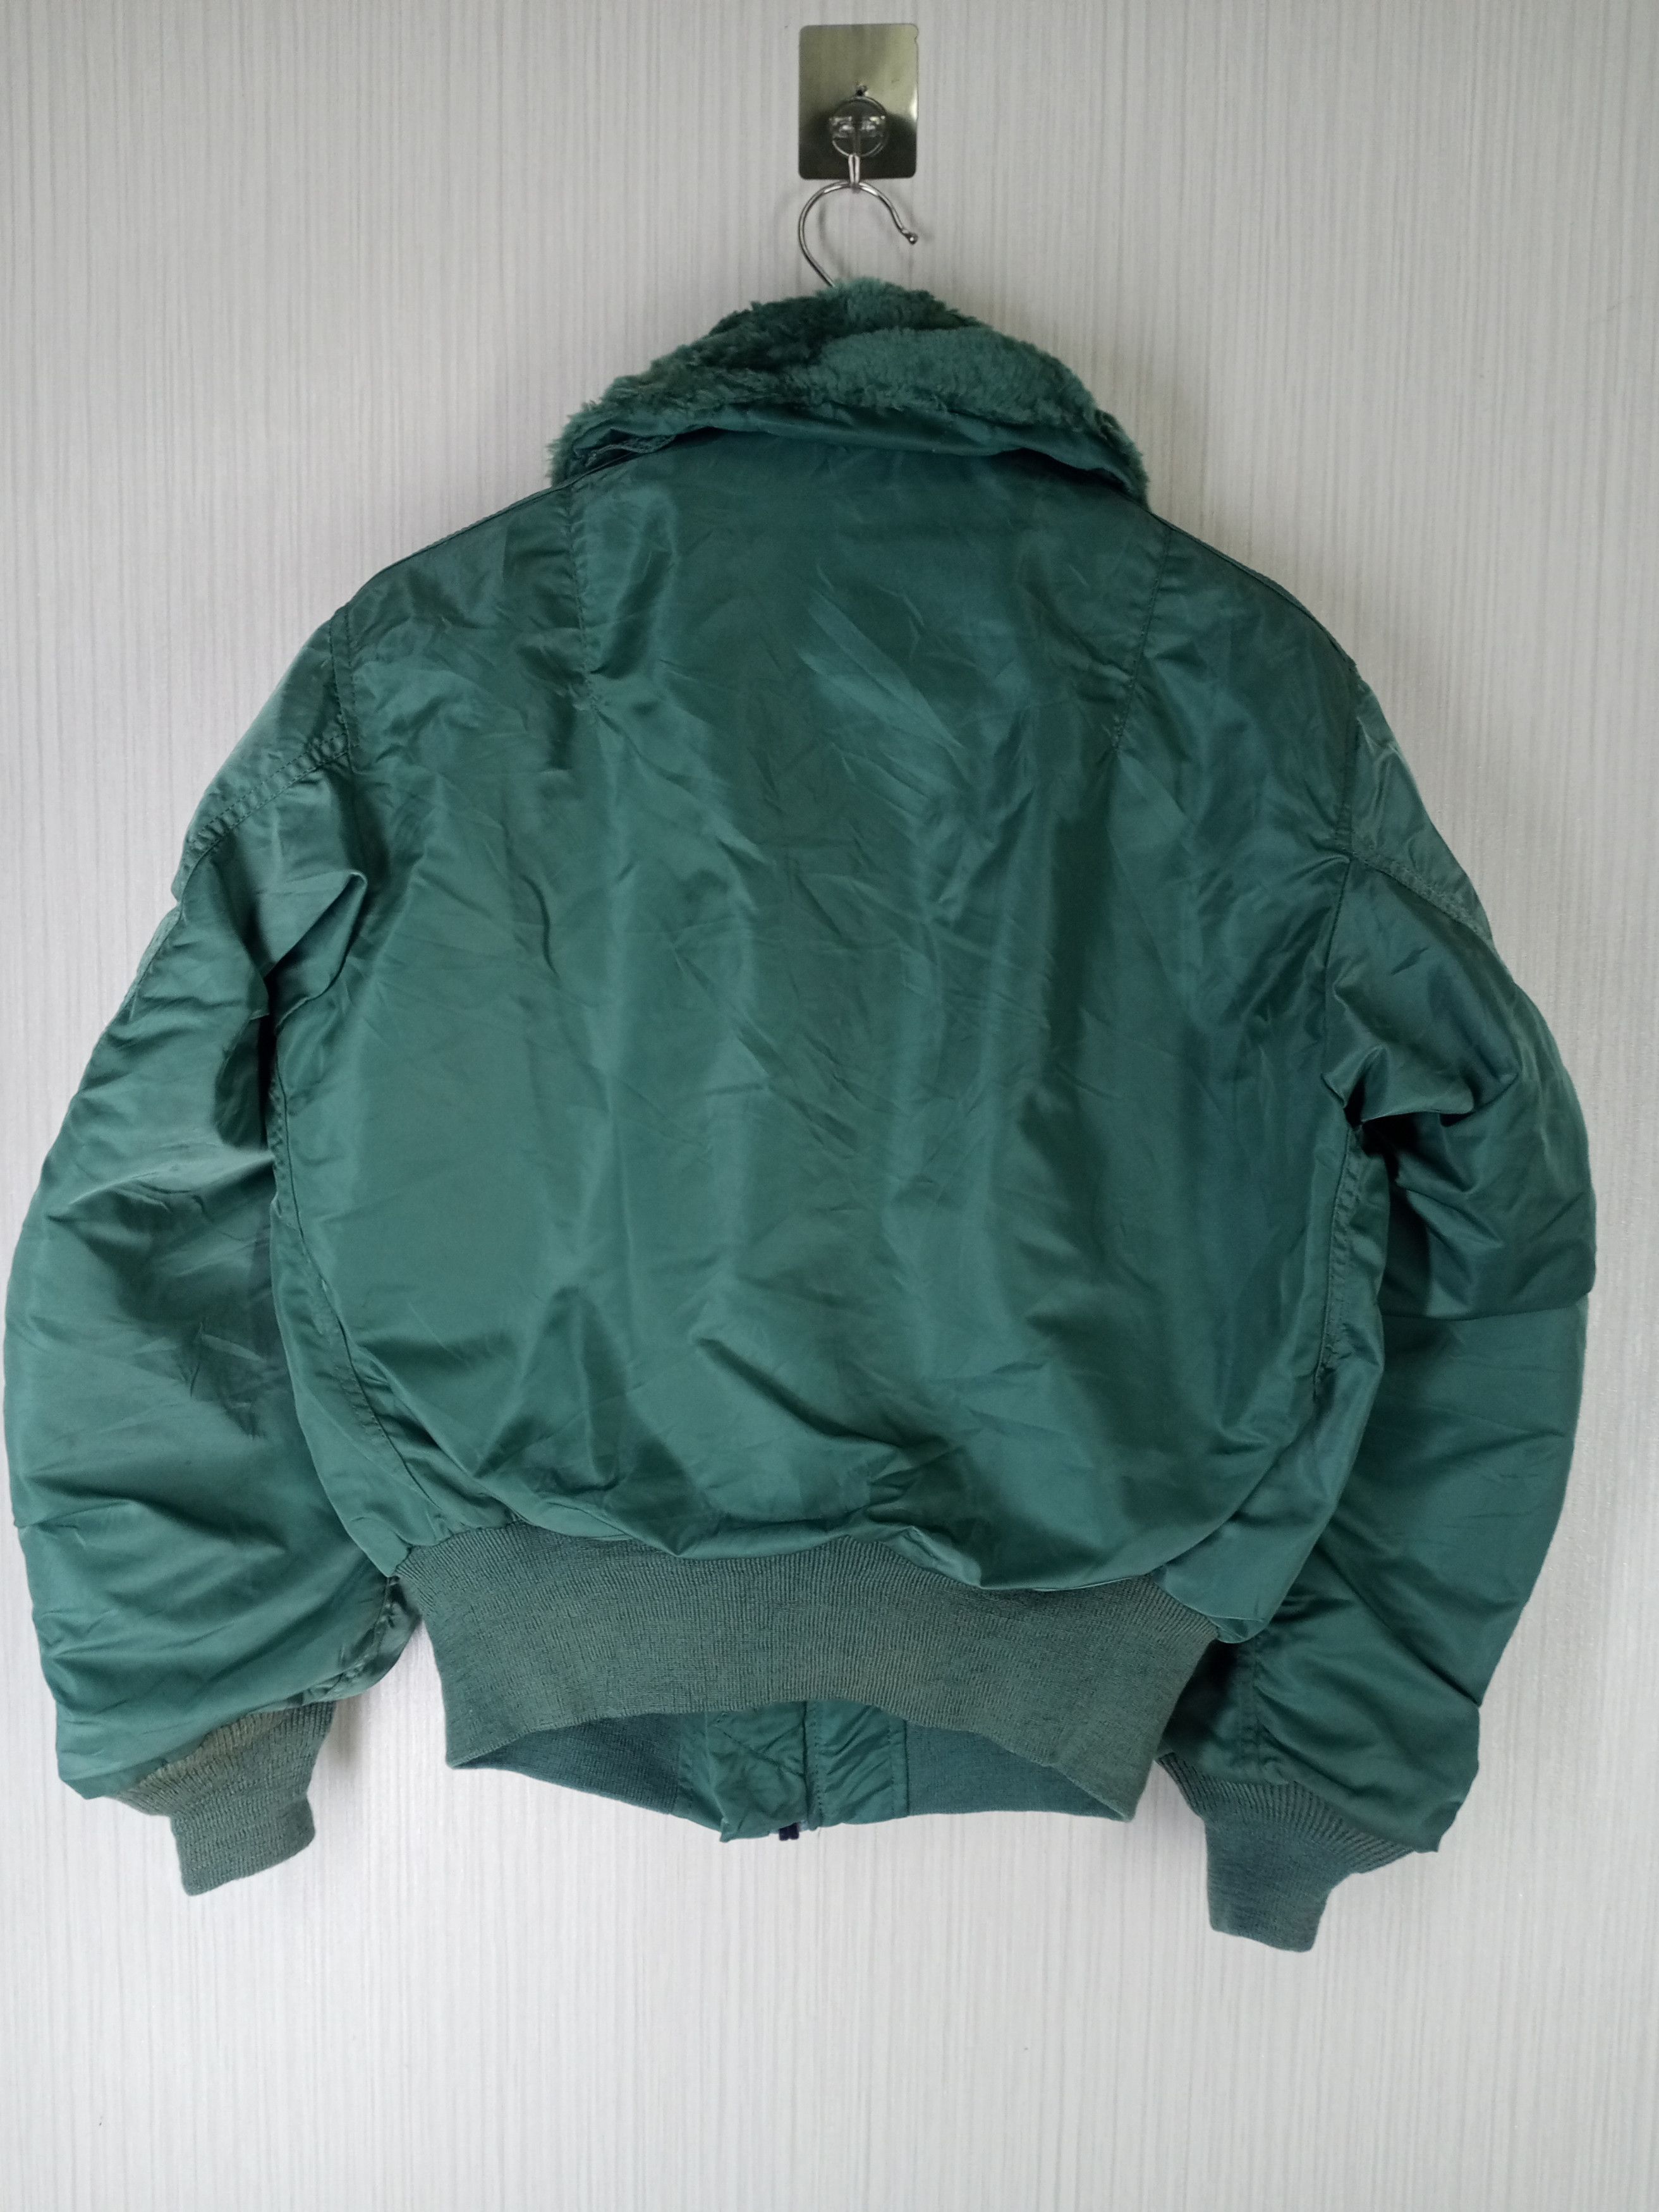 purchase discounted Rare Vintage Alpha Industries USAF B15D Bomber